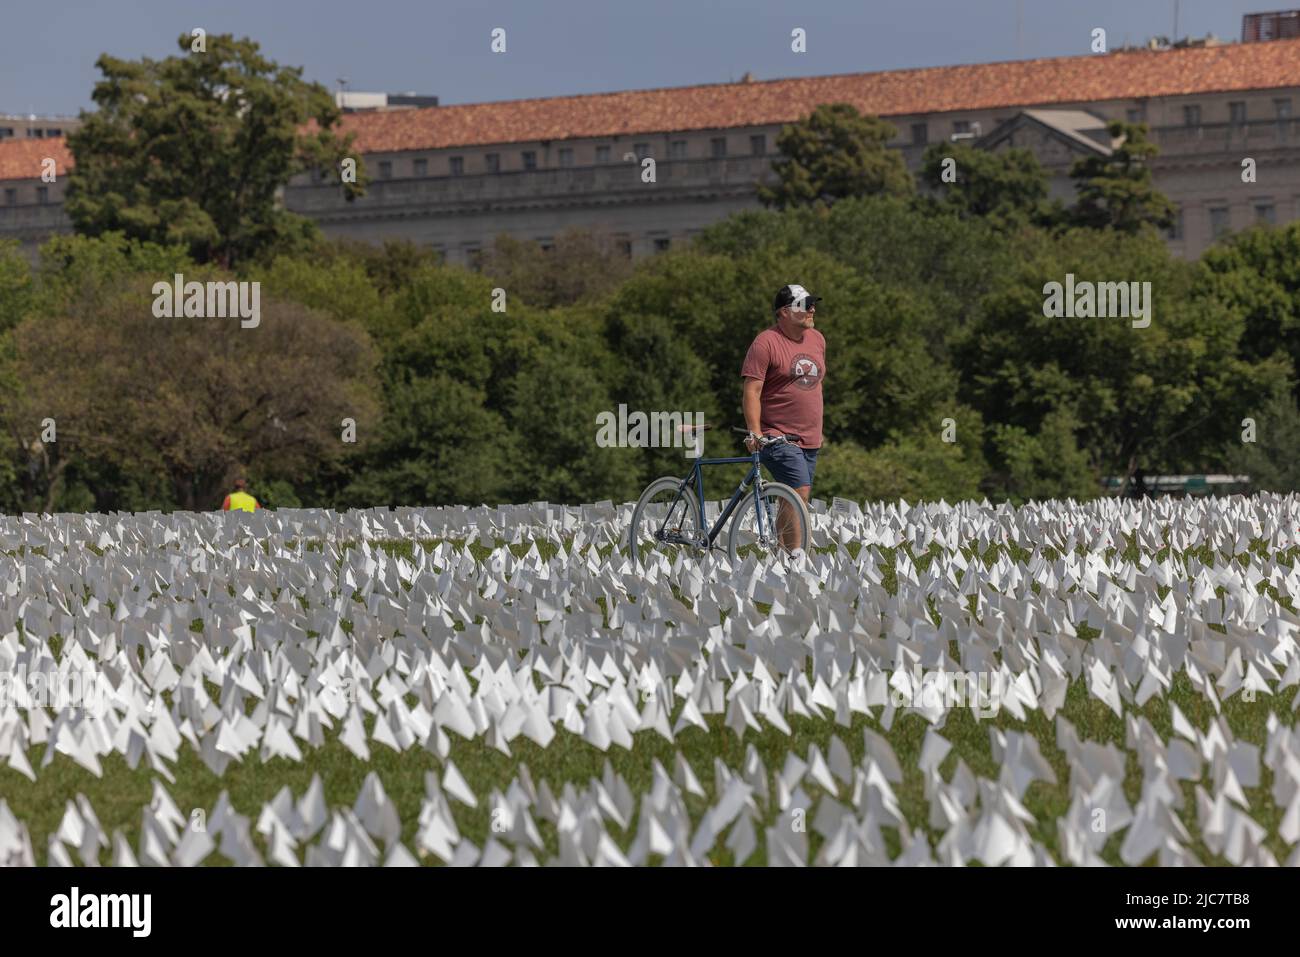 WASHINGTON, D.C. – September 19, 2021: A person visits “In America: Remember”, an installation by Suzanne Brennan Firstenberg honoring Covid victims. Stock Photo